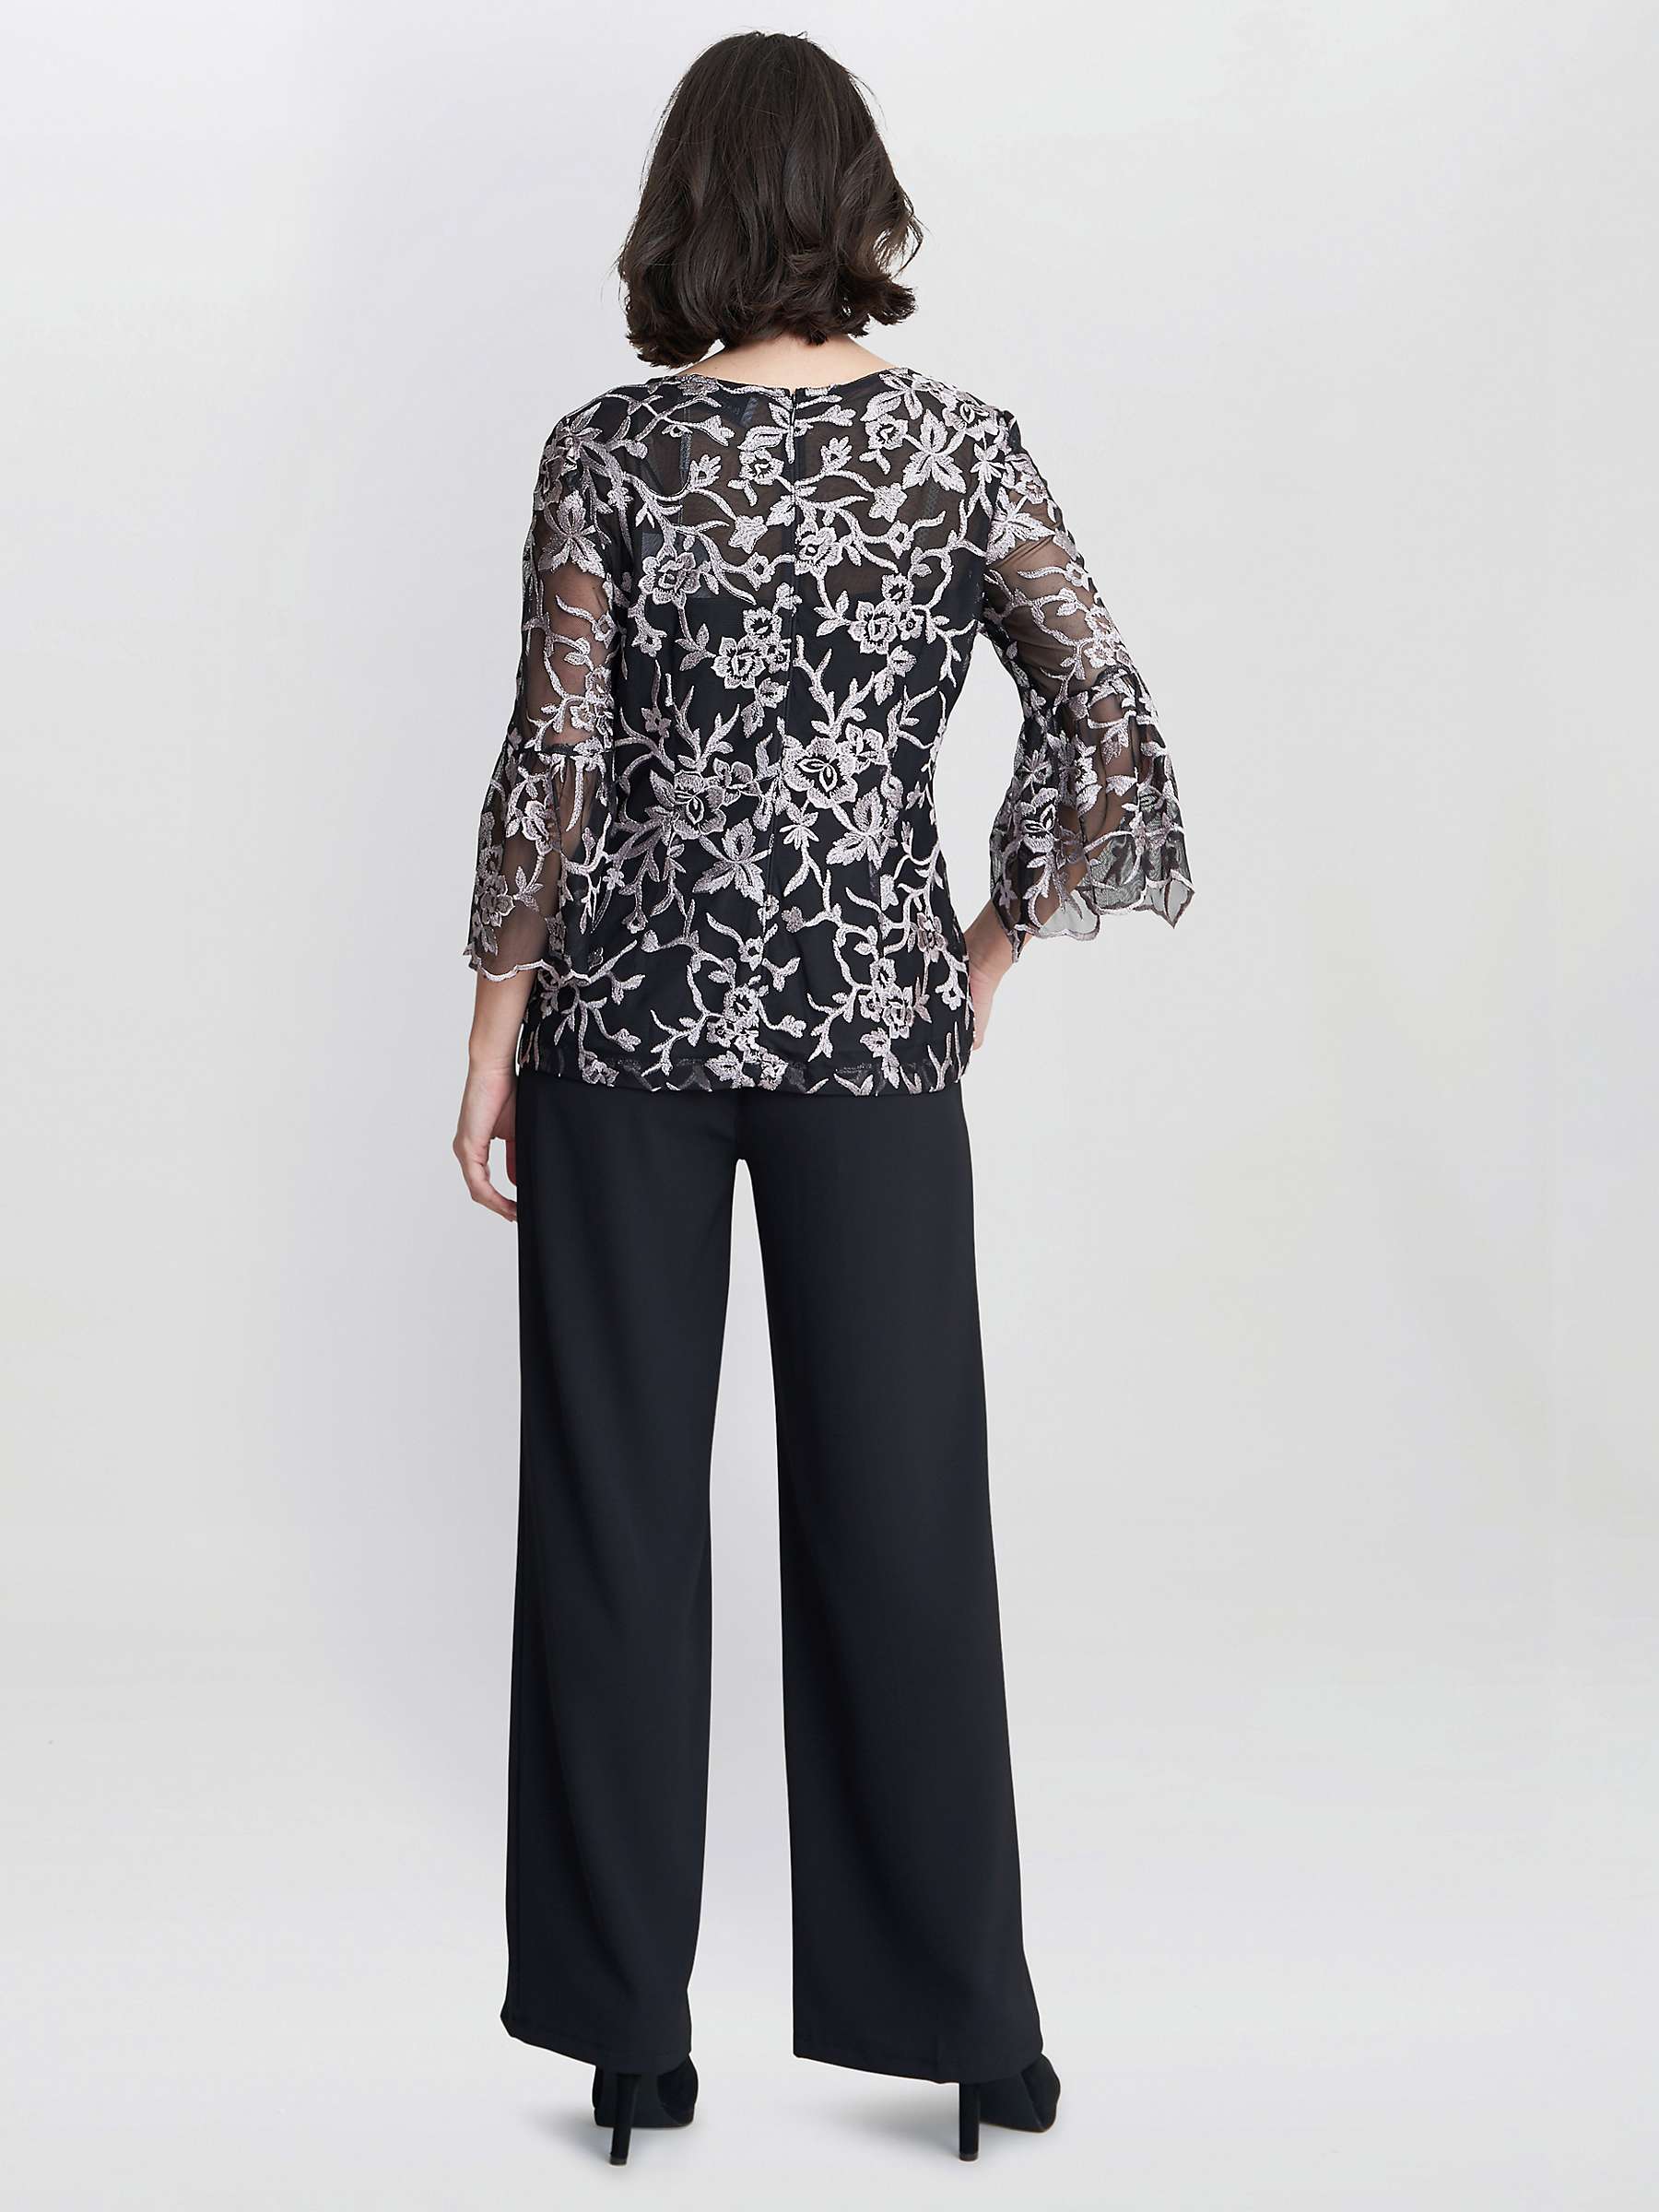 Buy Gina Bacconi Brianna Embroidered Blouse, Black/Pink Online at johnlewis.com